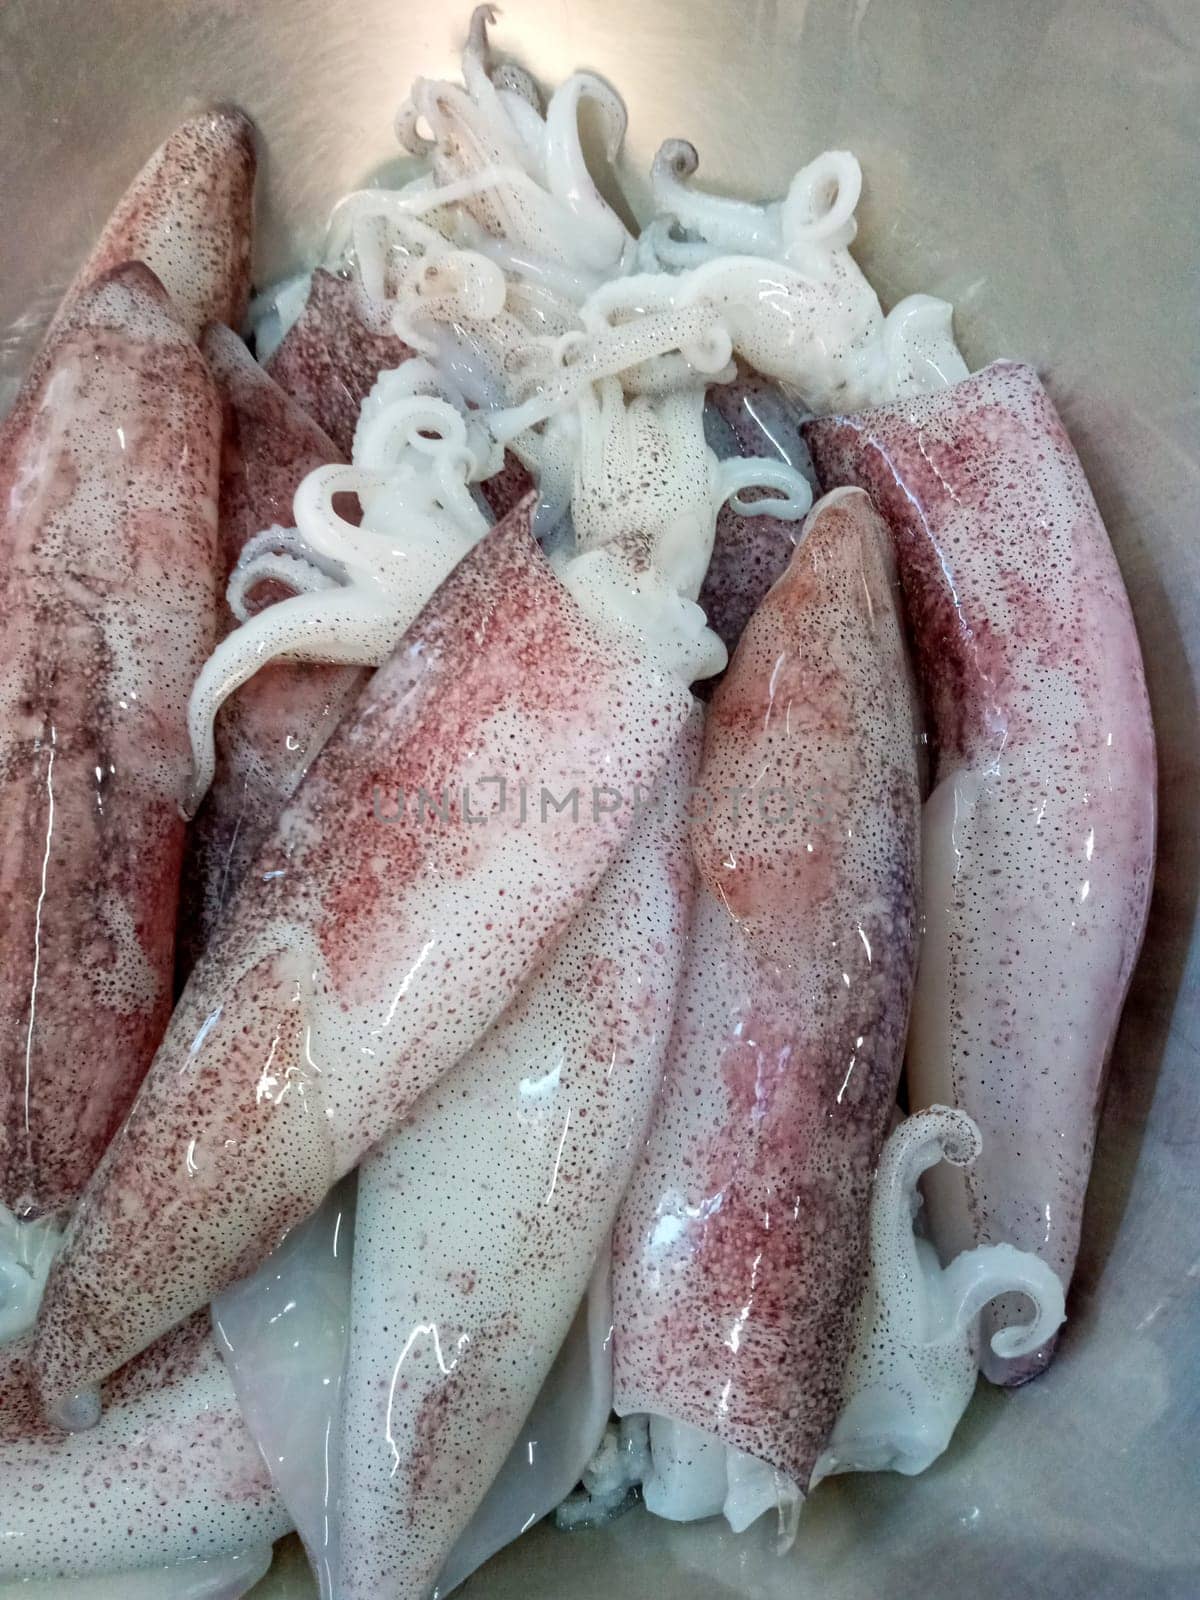 Fresh squid prepared for cooking